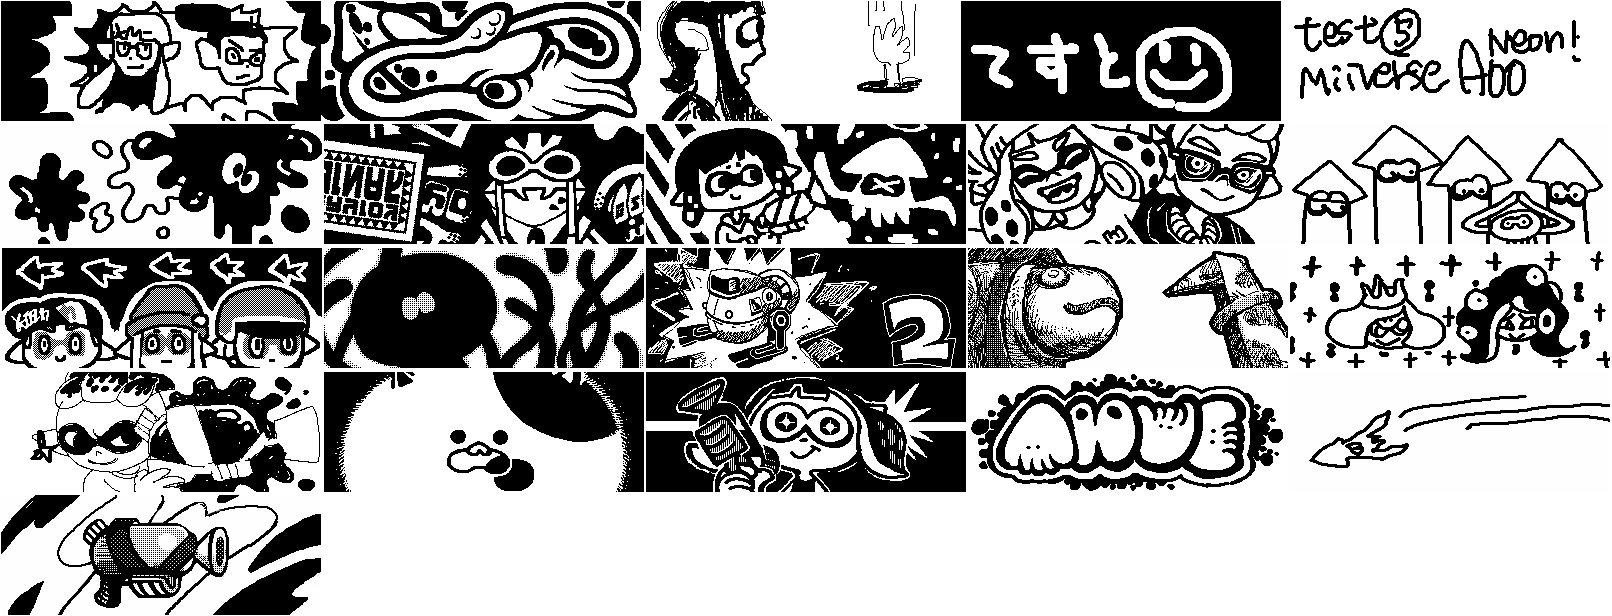 Miiverse Placeholders